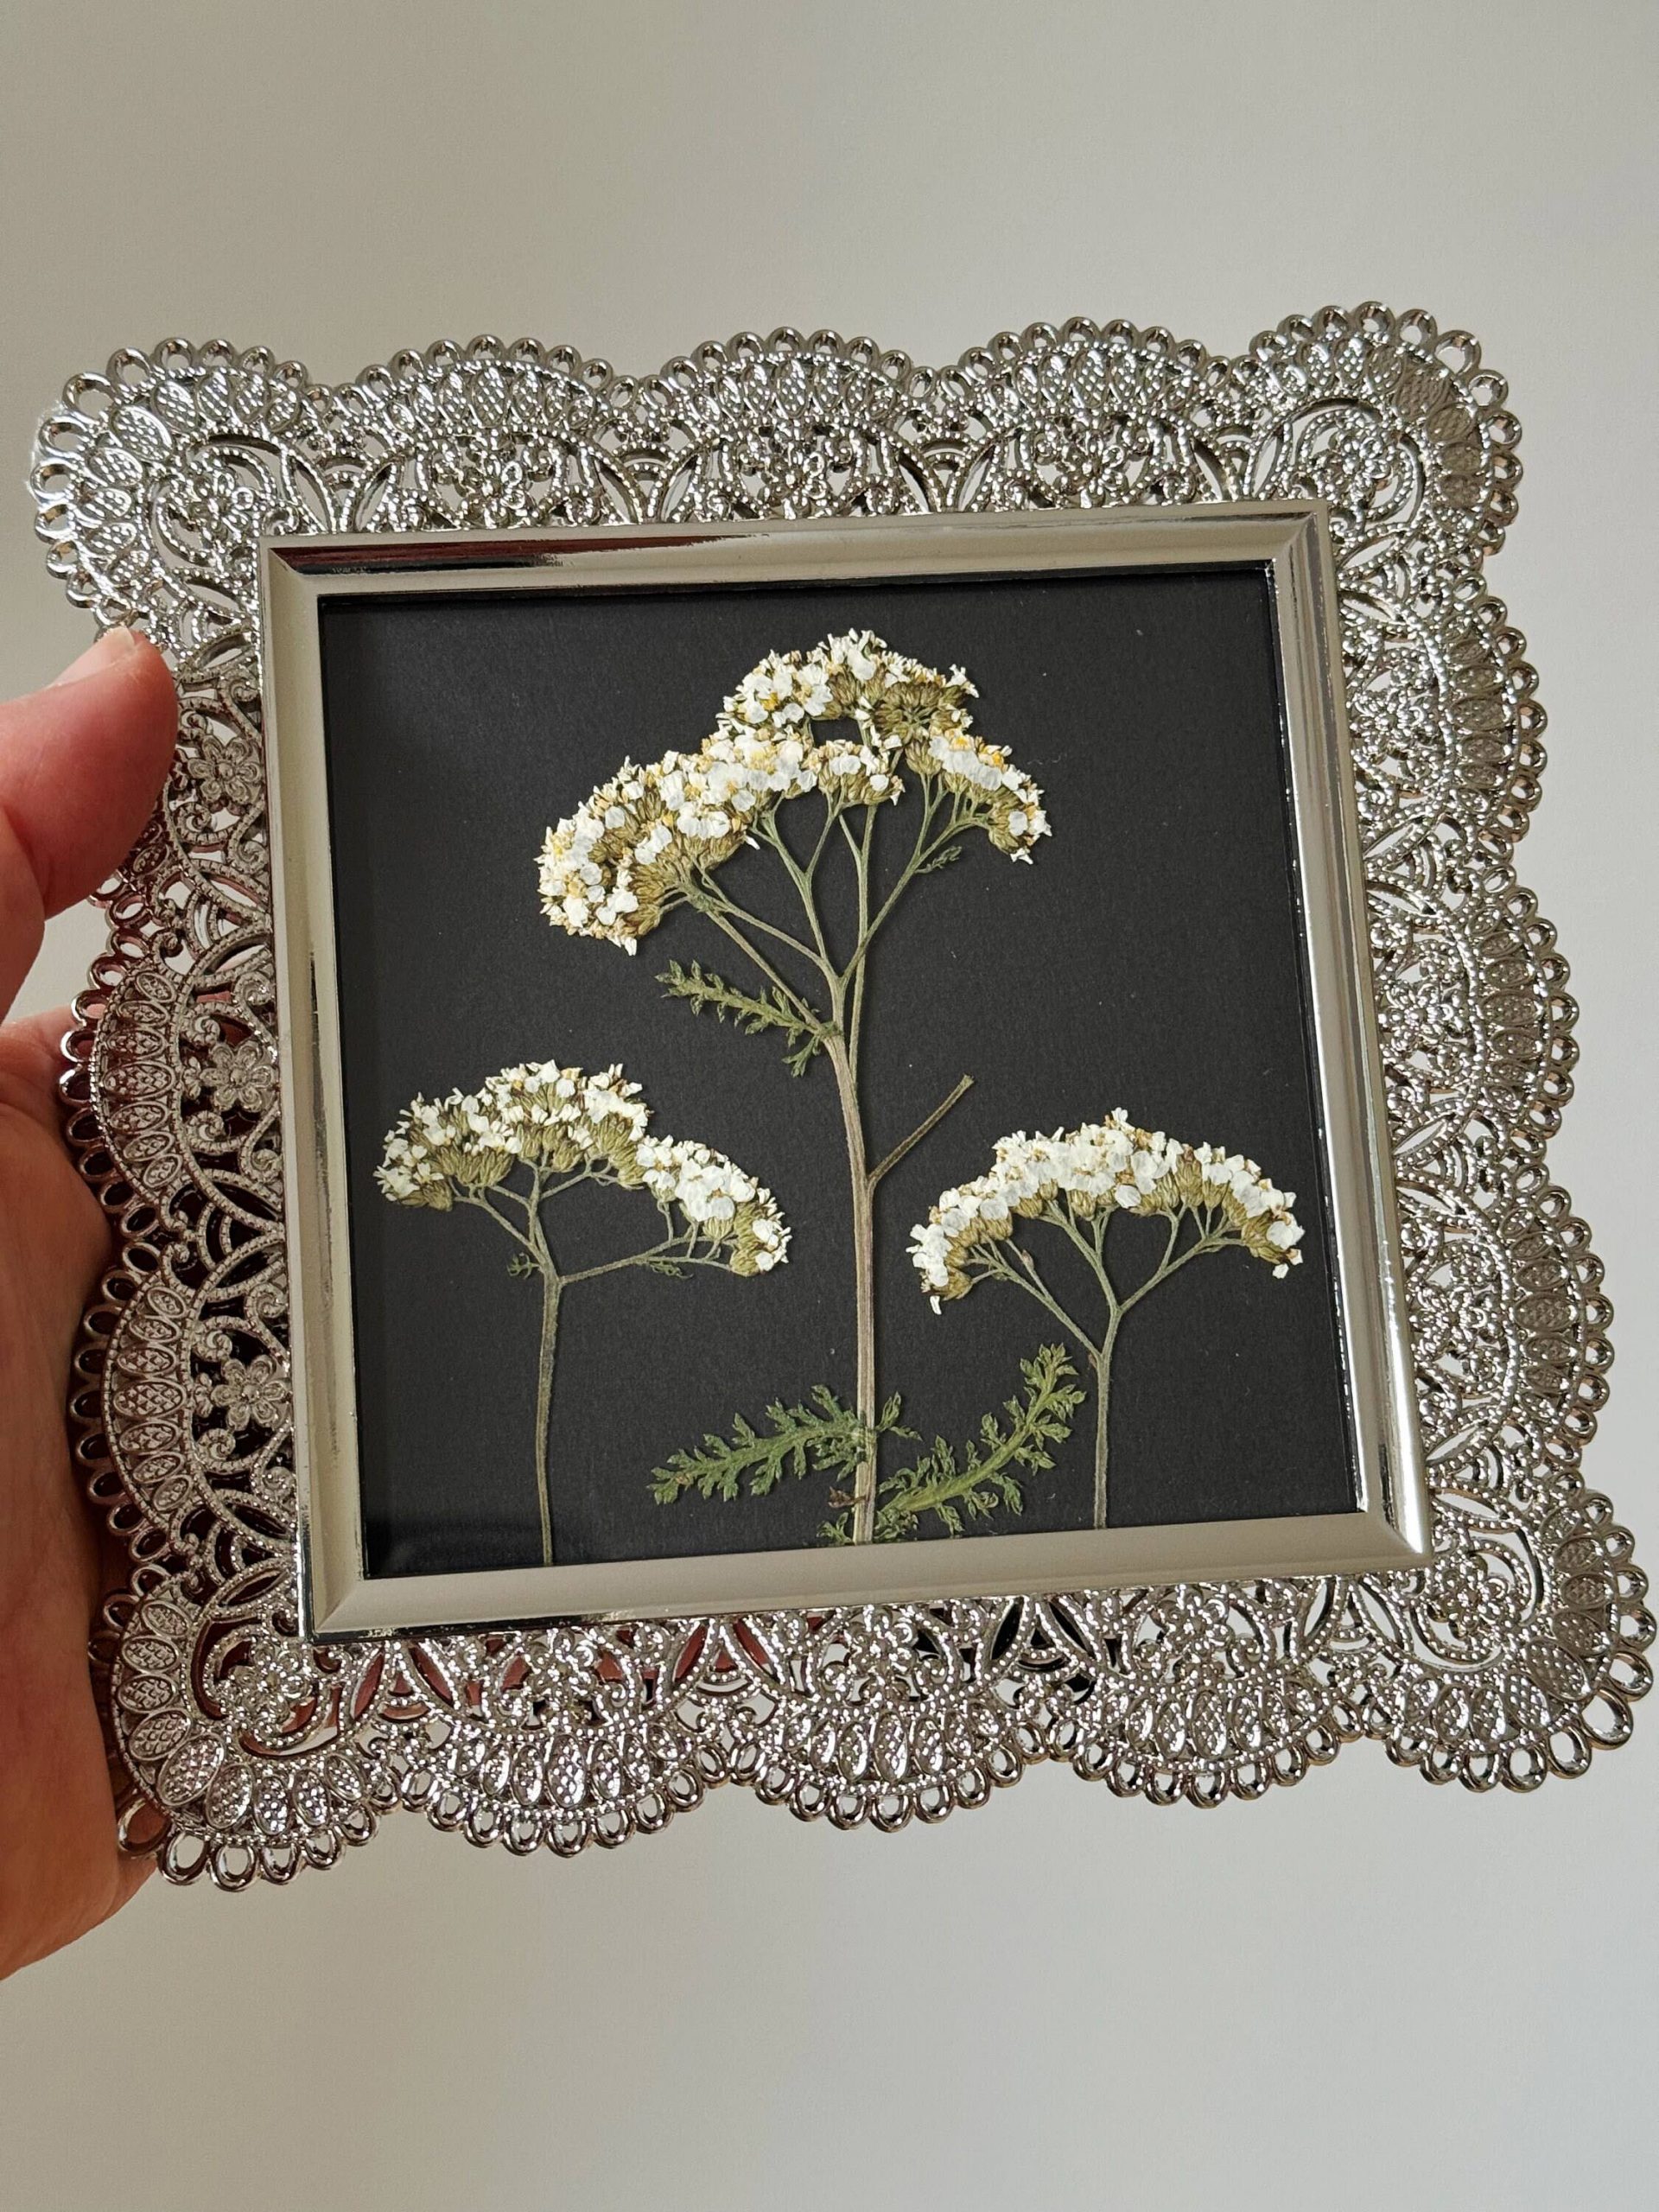 Pressed white yarrow flowers mounted on black paper in a silver lace metal square frame by kindness roots